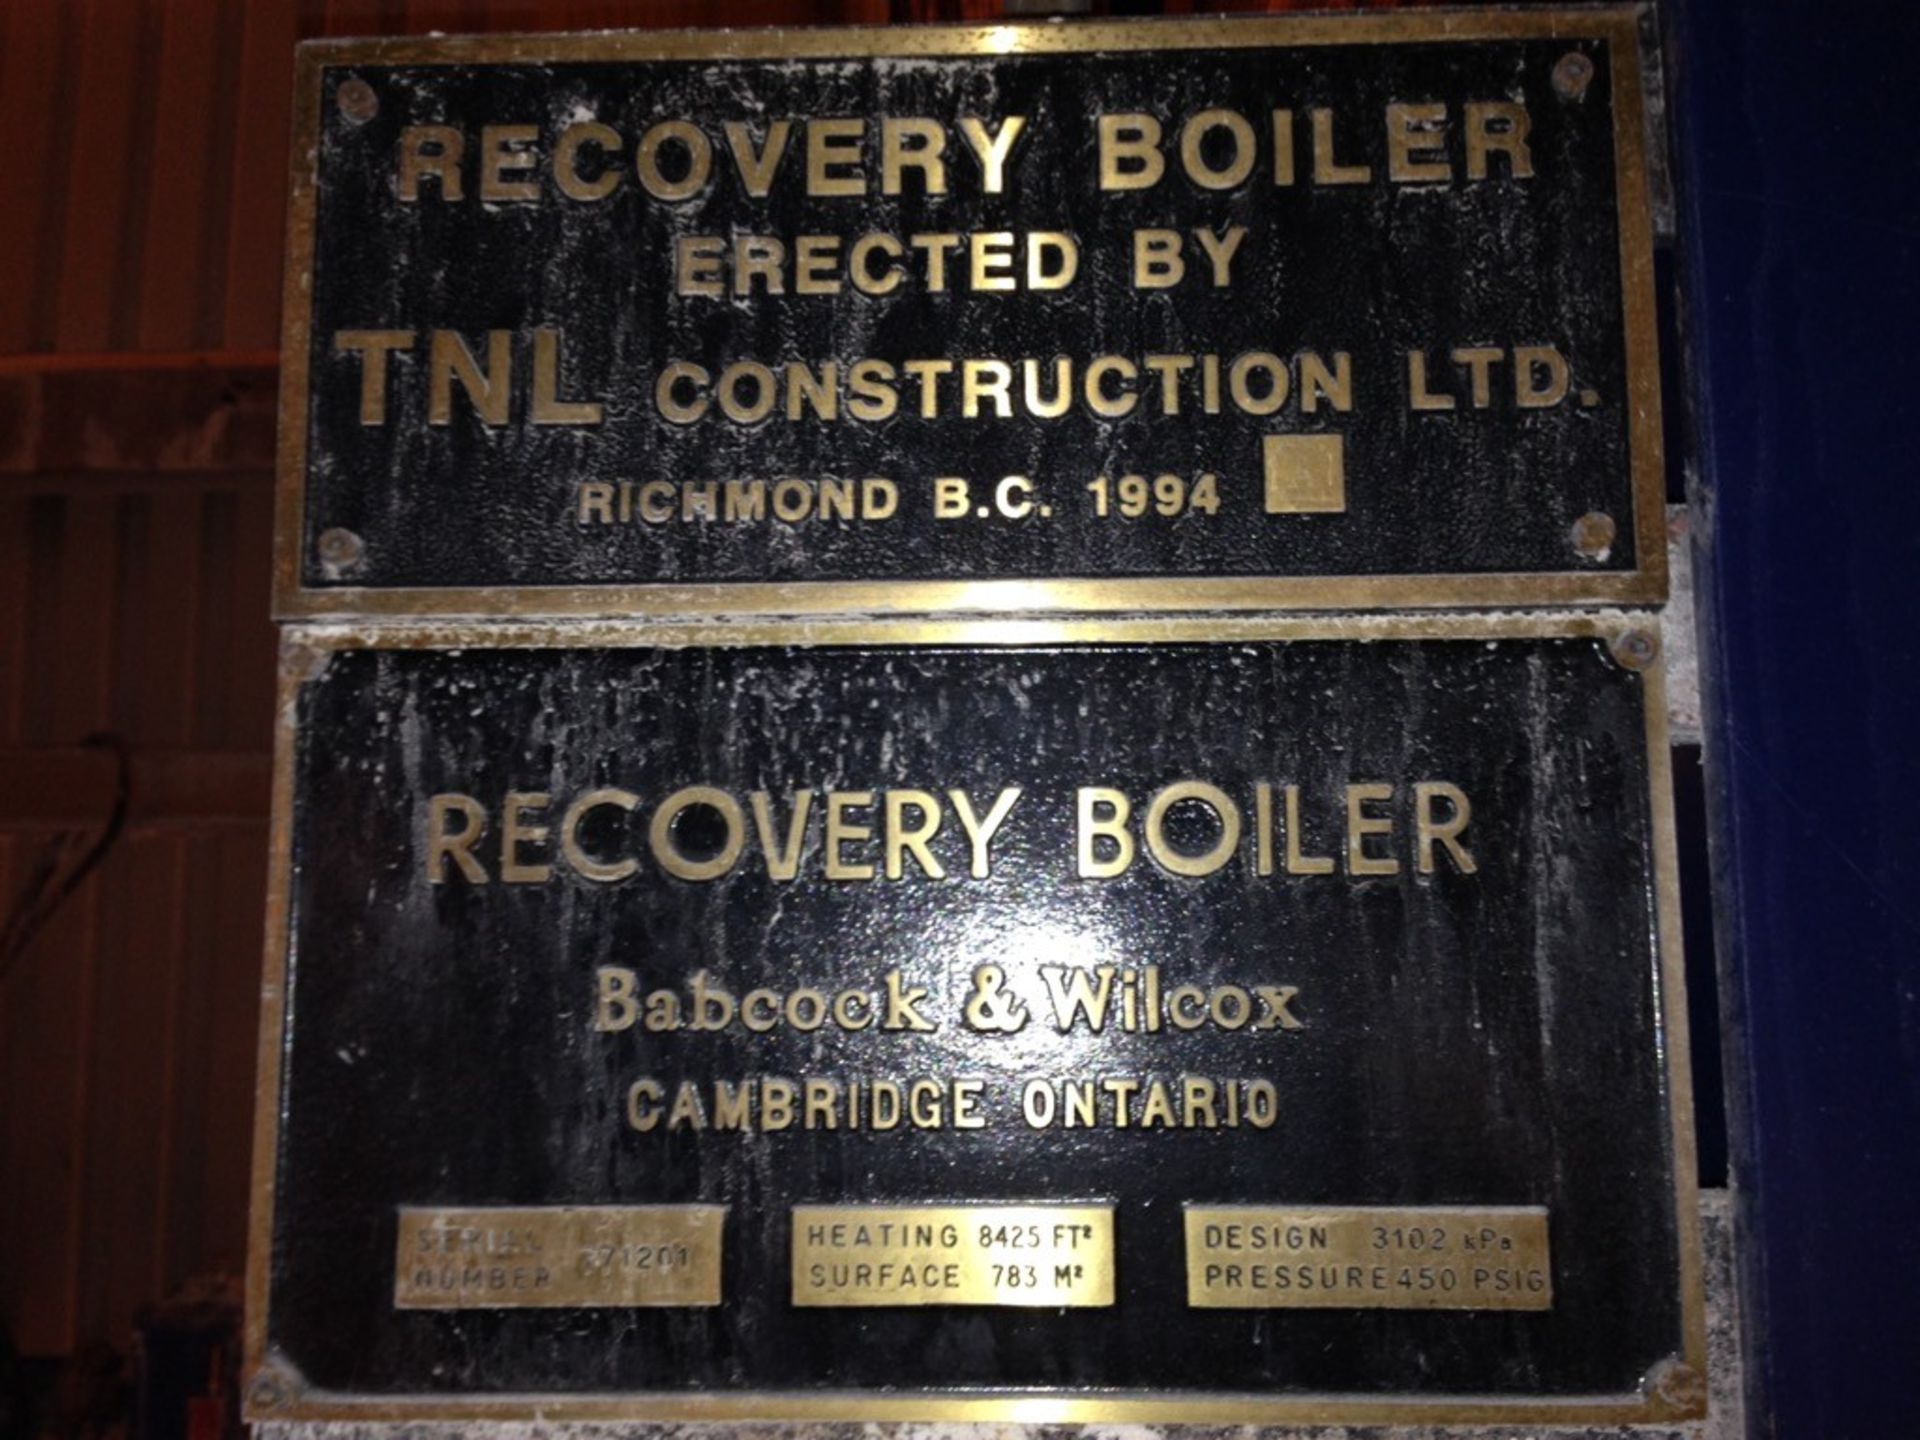 Recovery Boiler - Image 49 of 49